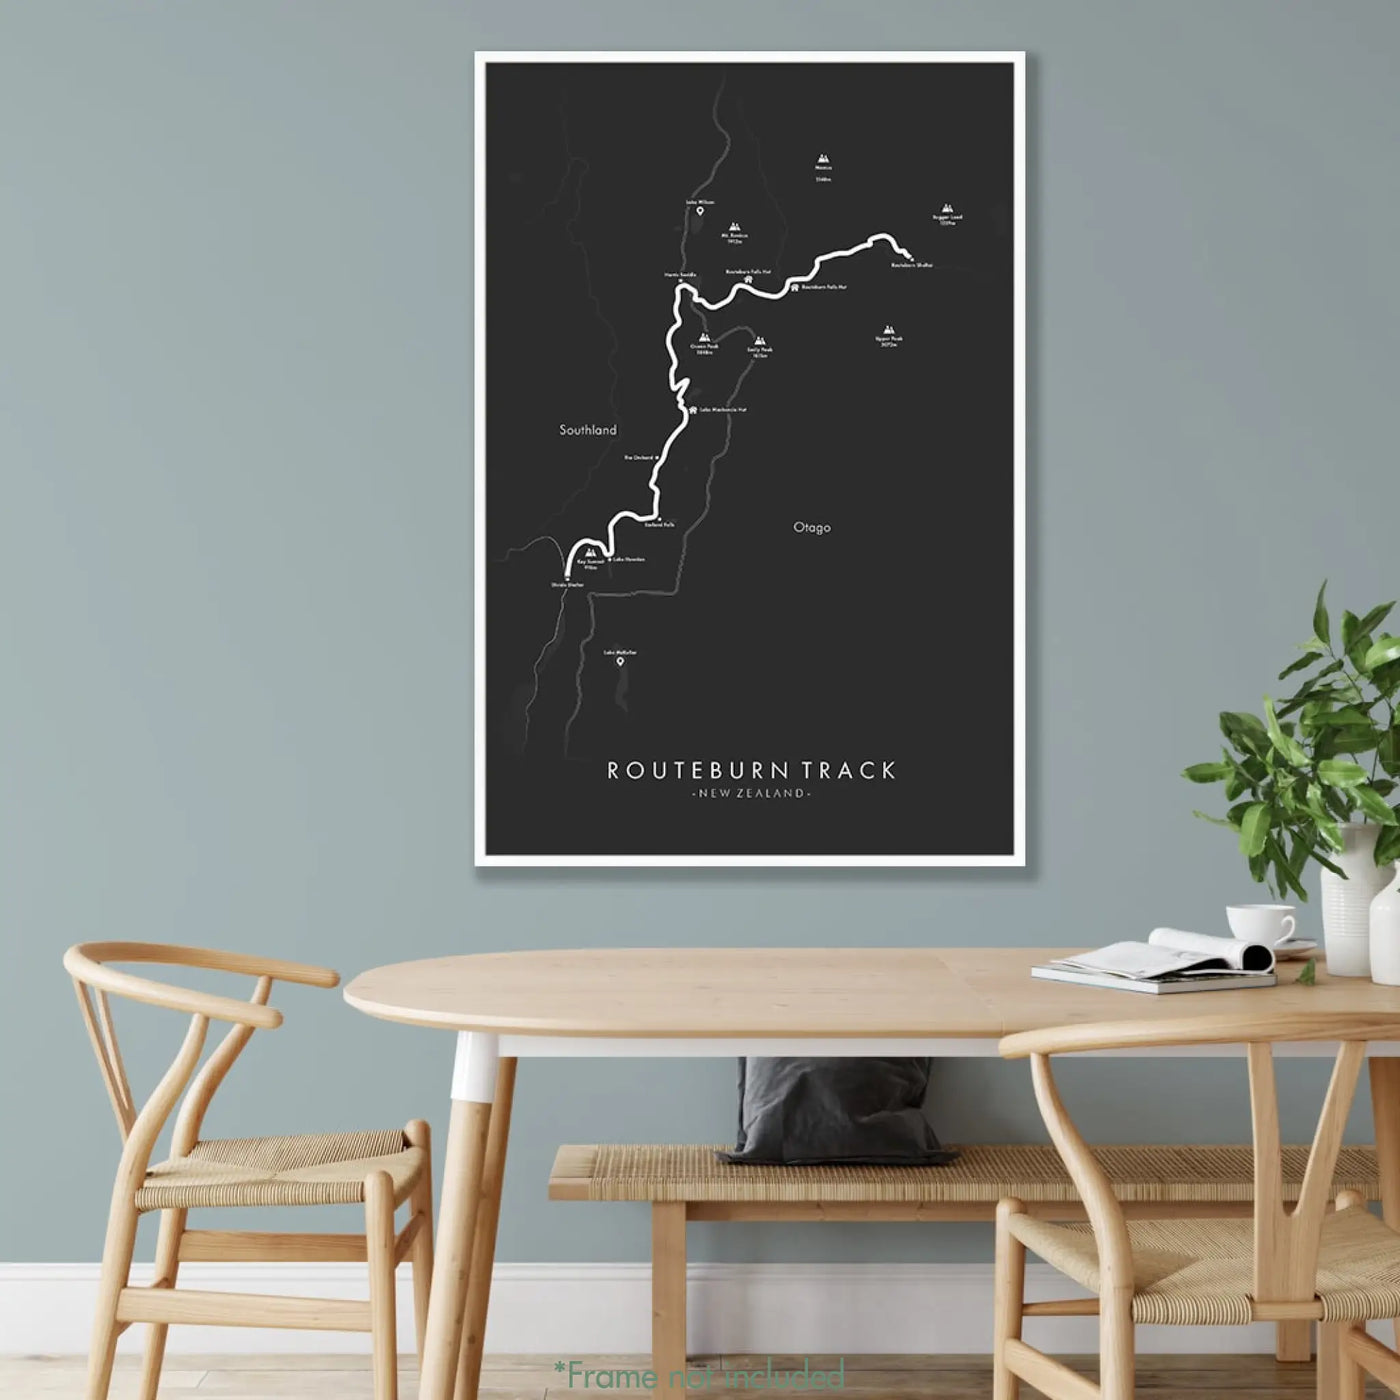 Trail Poster of Routeburn Track - Grey Mockup